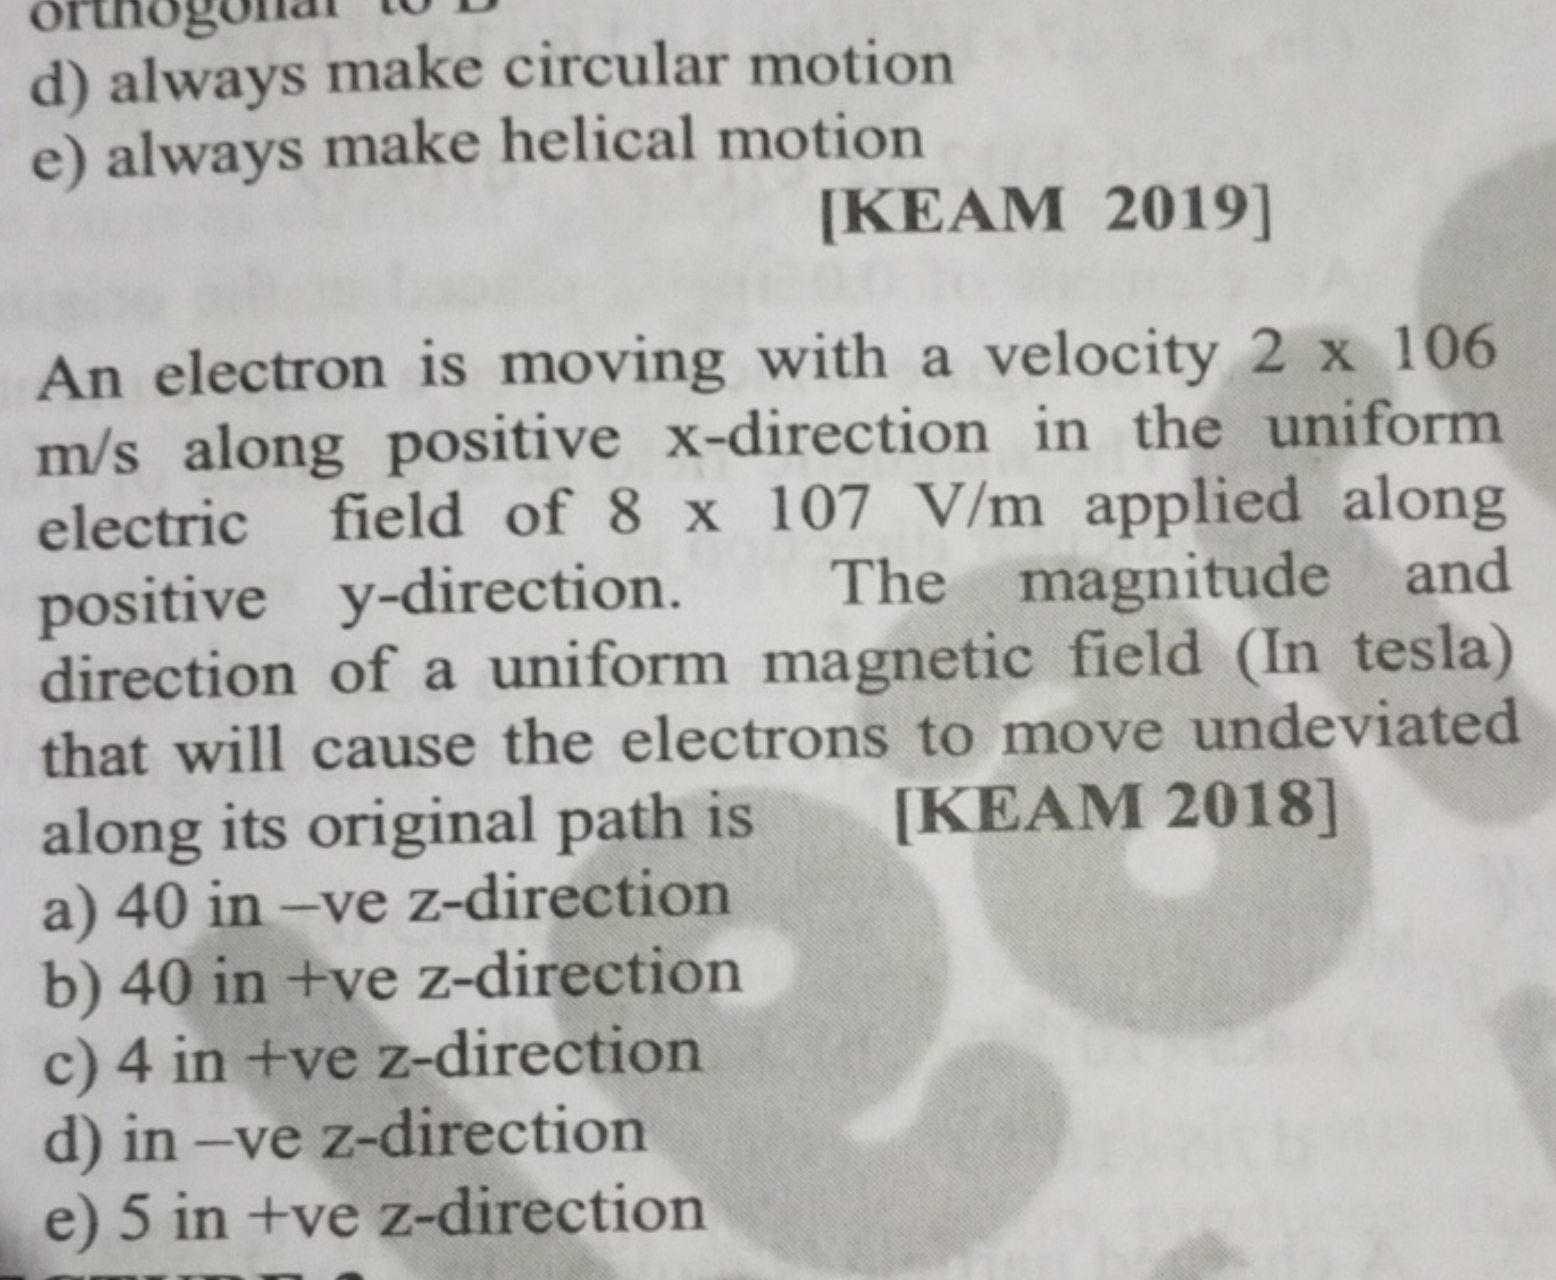 [KEAM 2019] An electron is moving with a velocity 2×106 m/s along posi